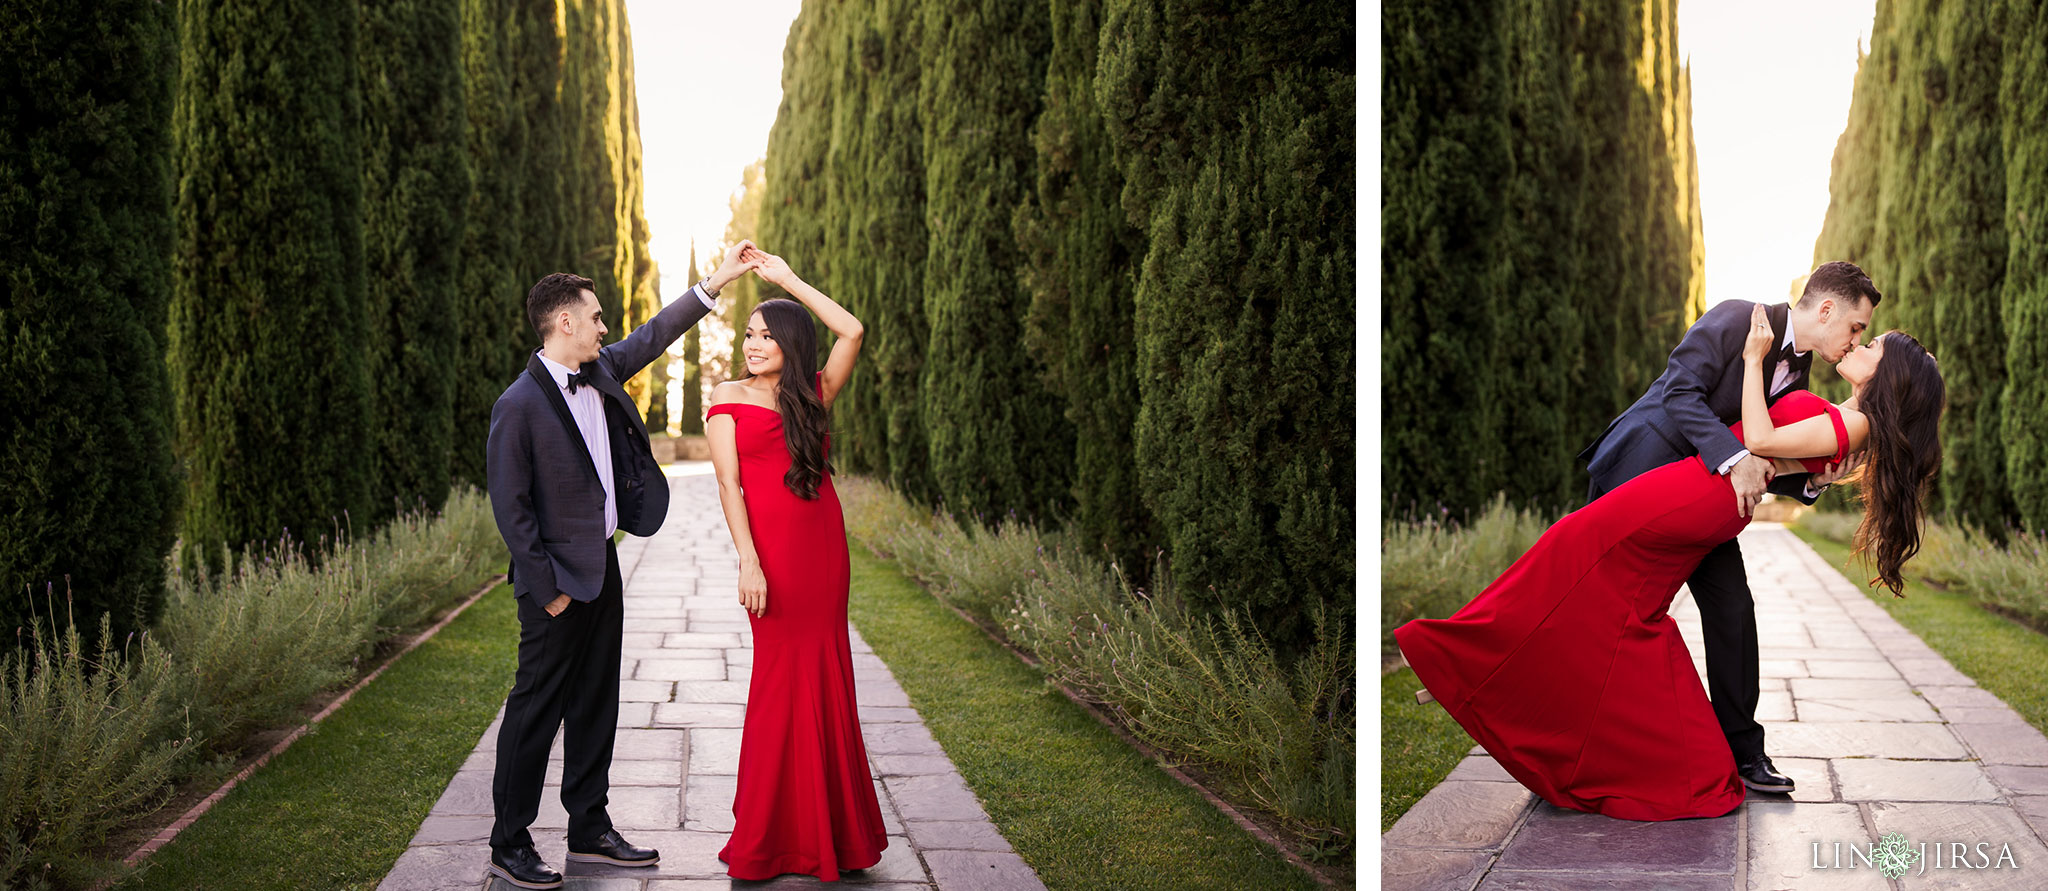 09 greystone mansion beverly hills engagement photography